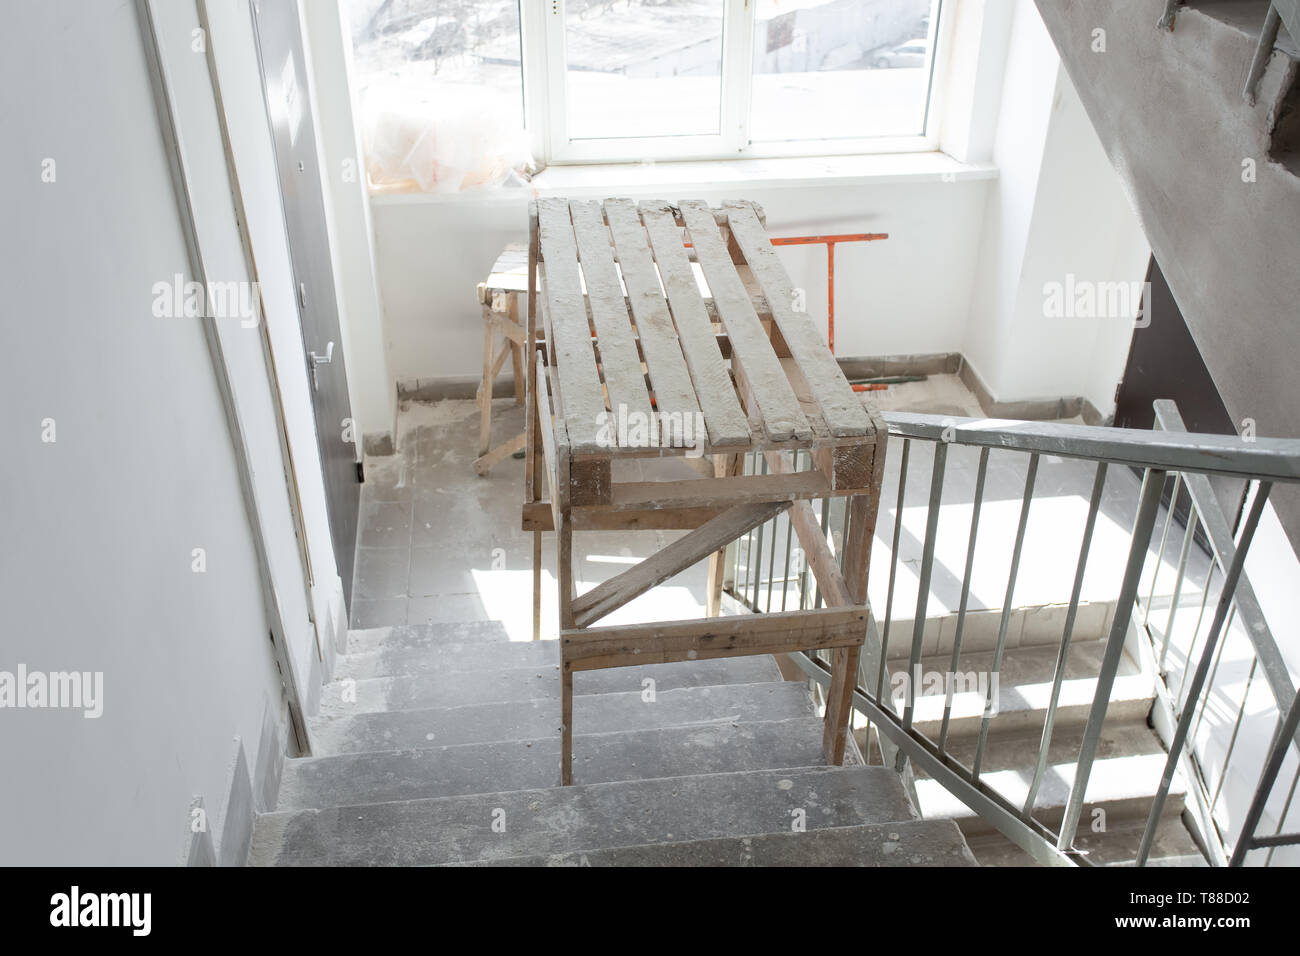 Room Is Under Renovation Or Under Construction Stock Photo Alamy